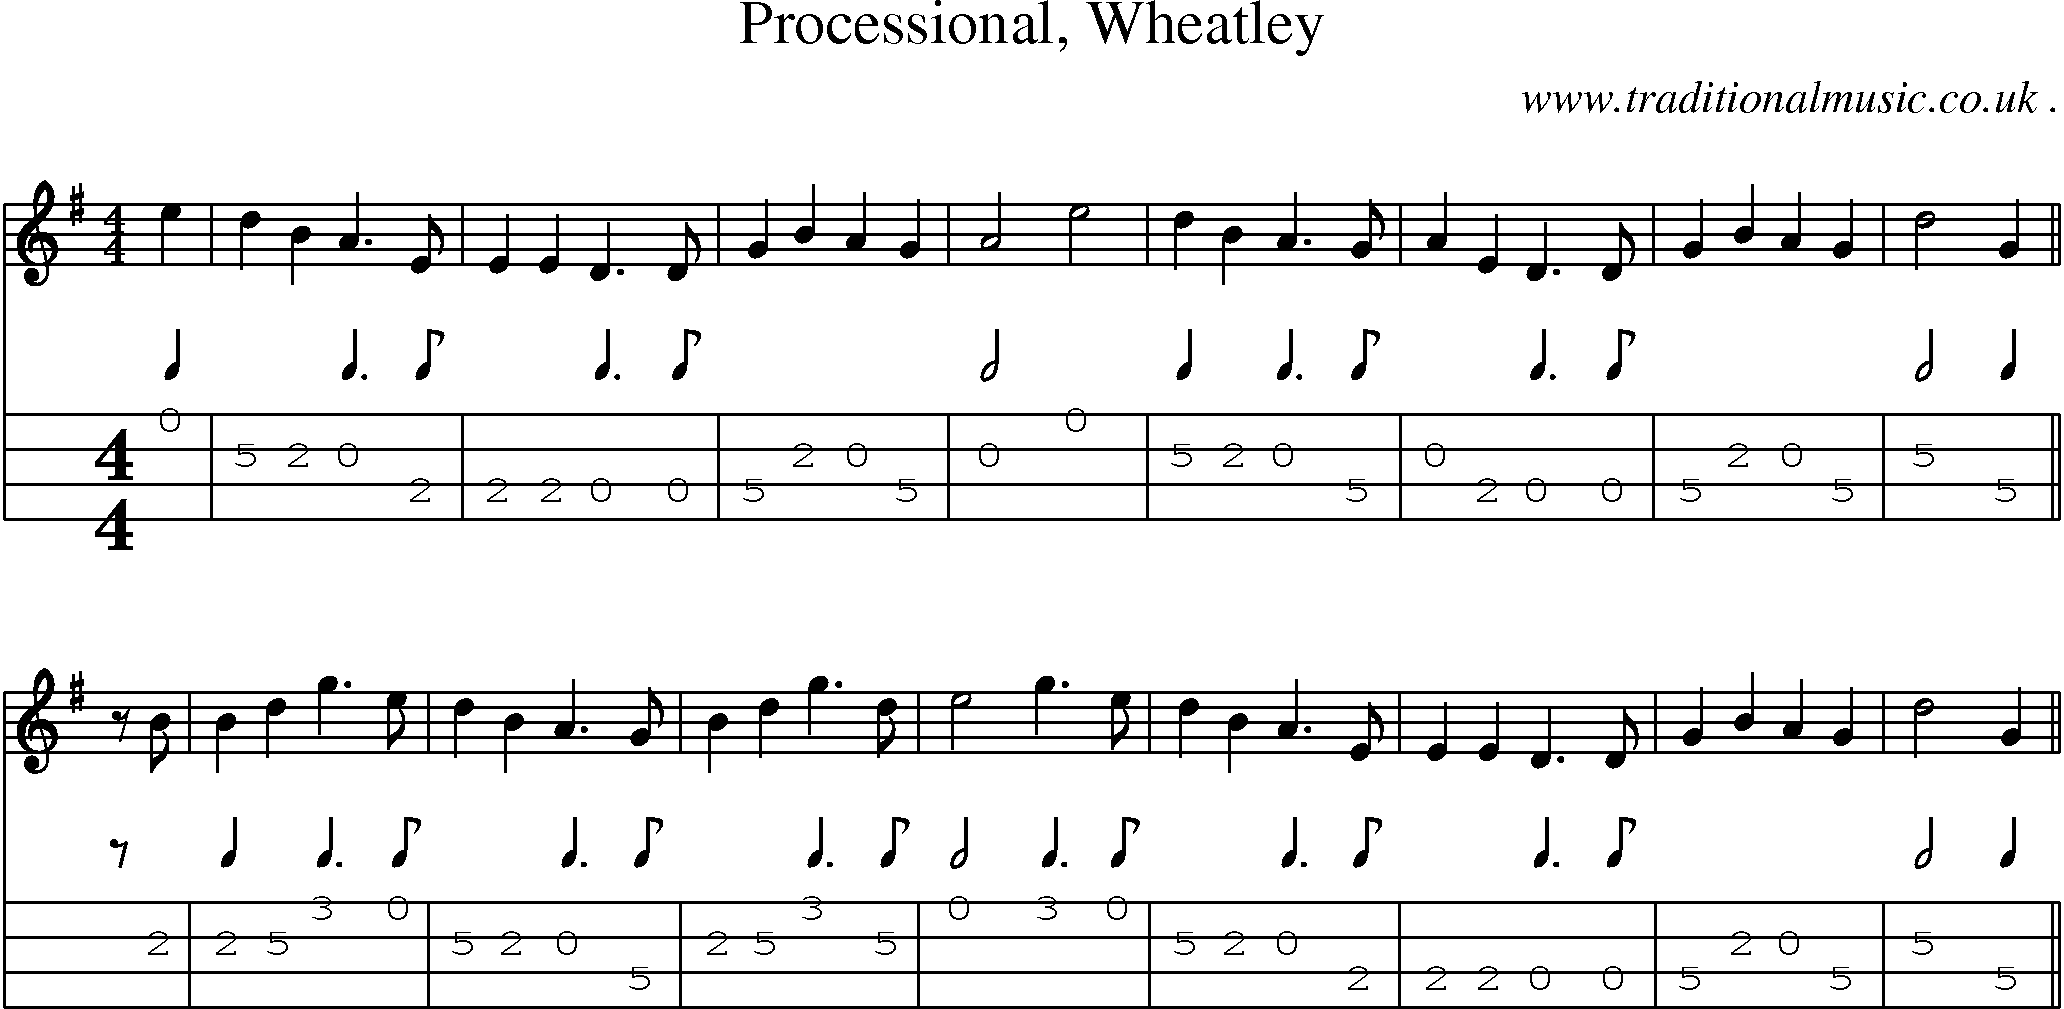 Sheet-Music and Mandolin Tabs for Processional Wheatley